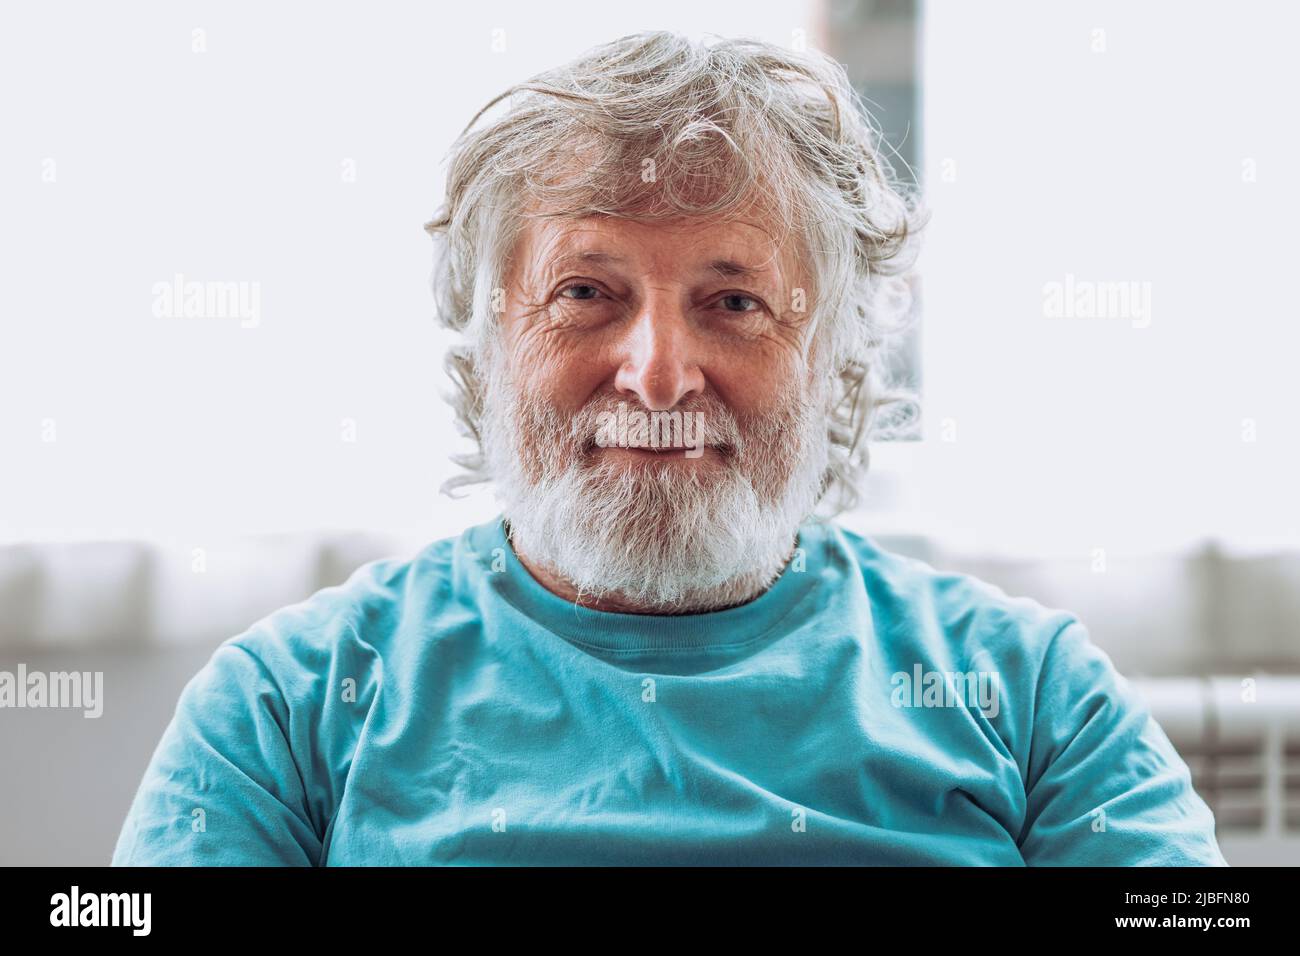 Elderly male with gray beard against blurred background looking at camera at home Stock Photo